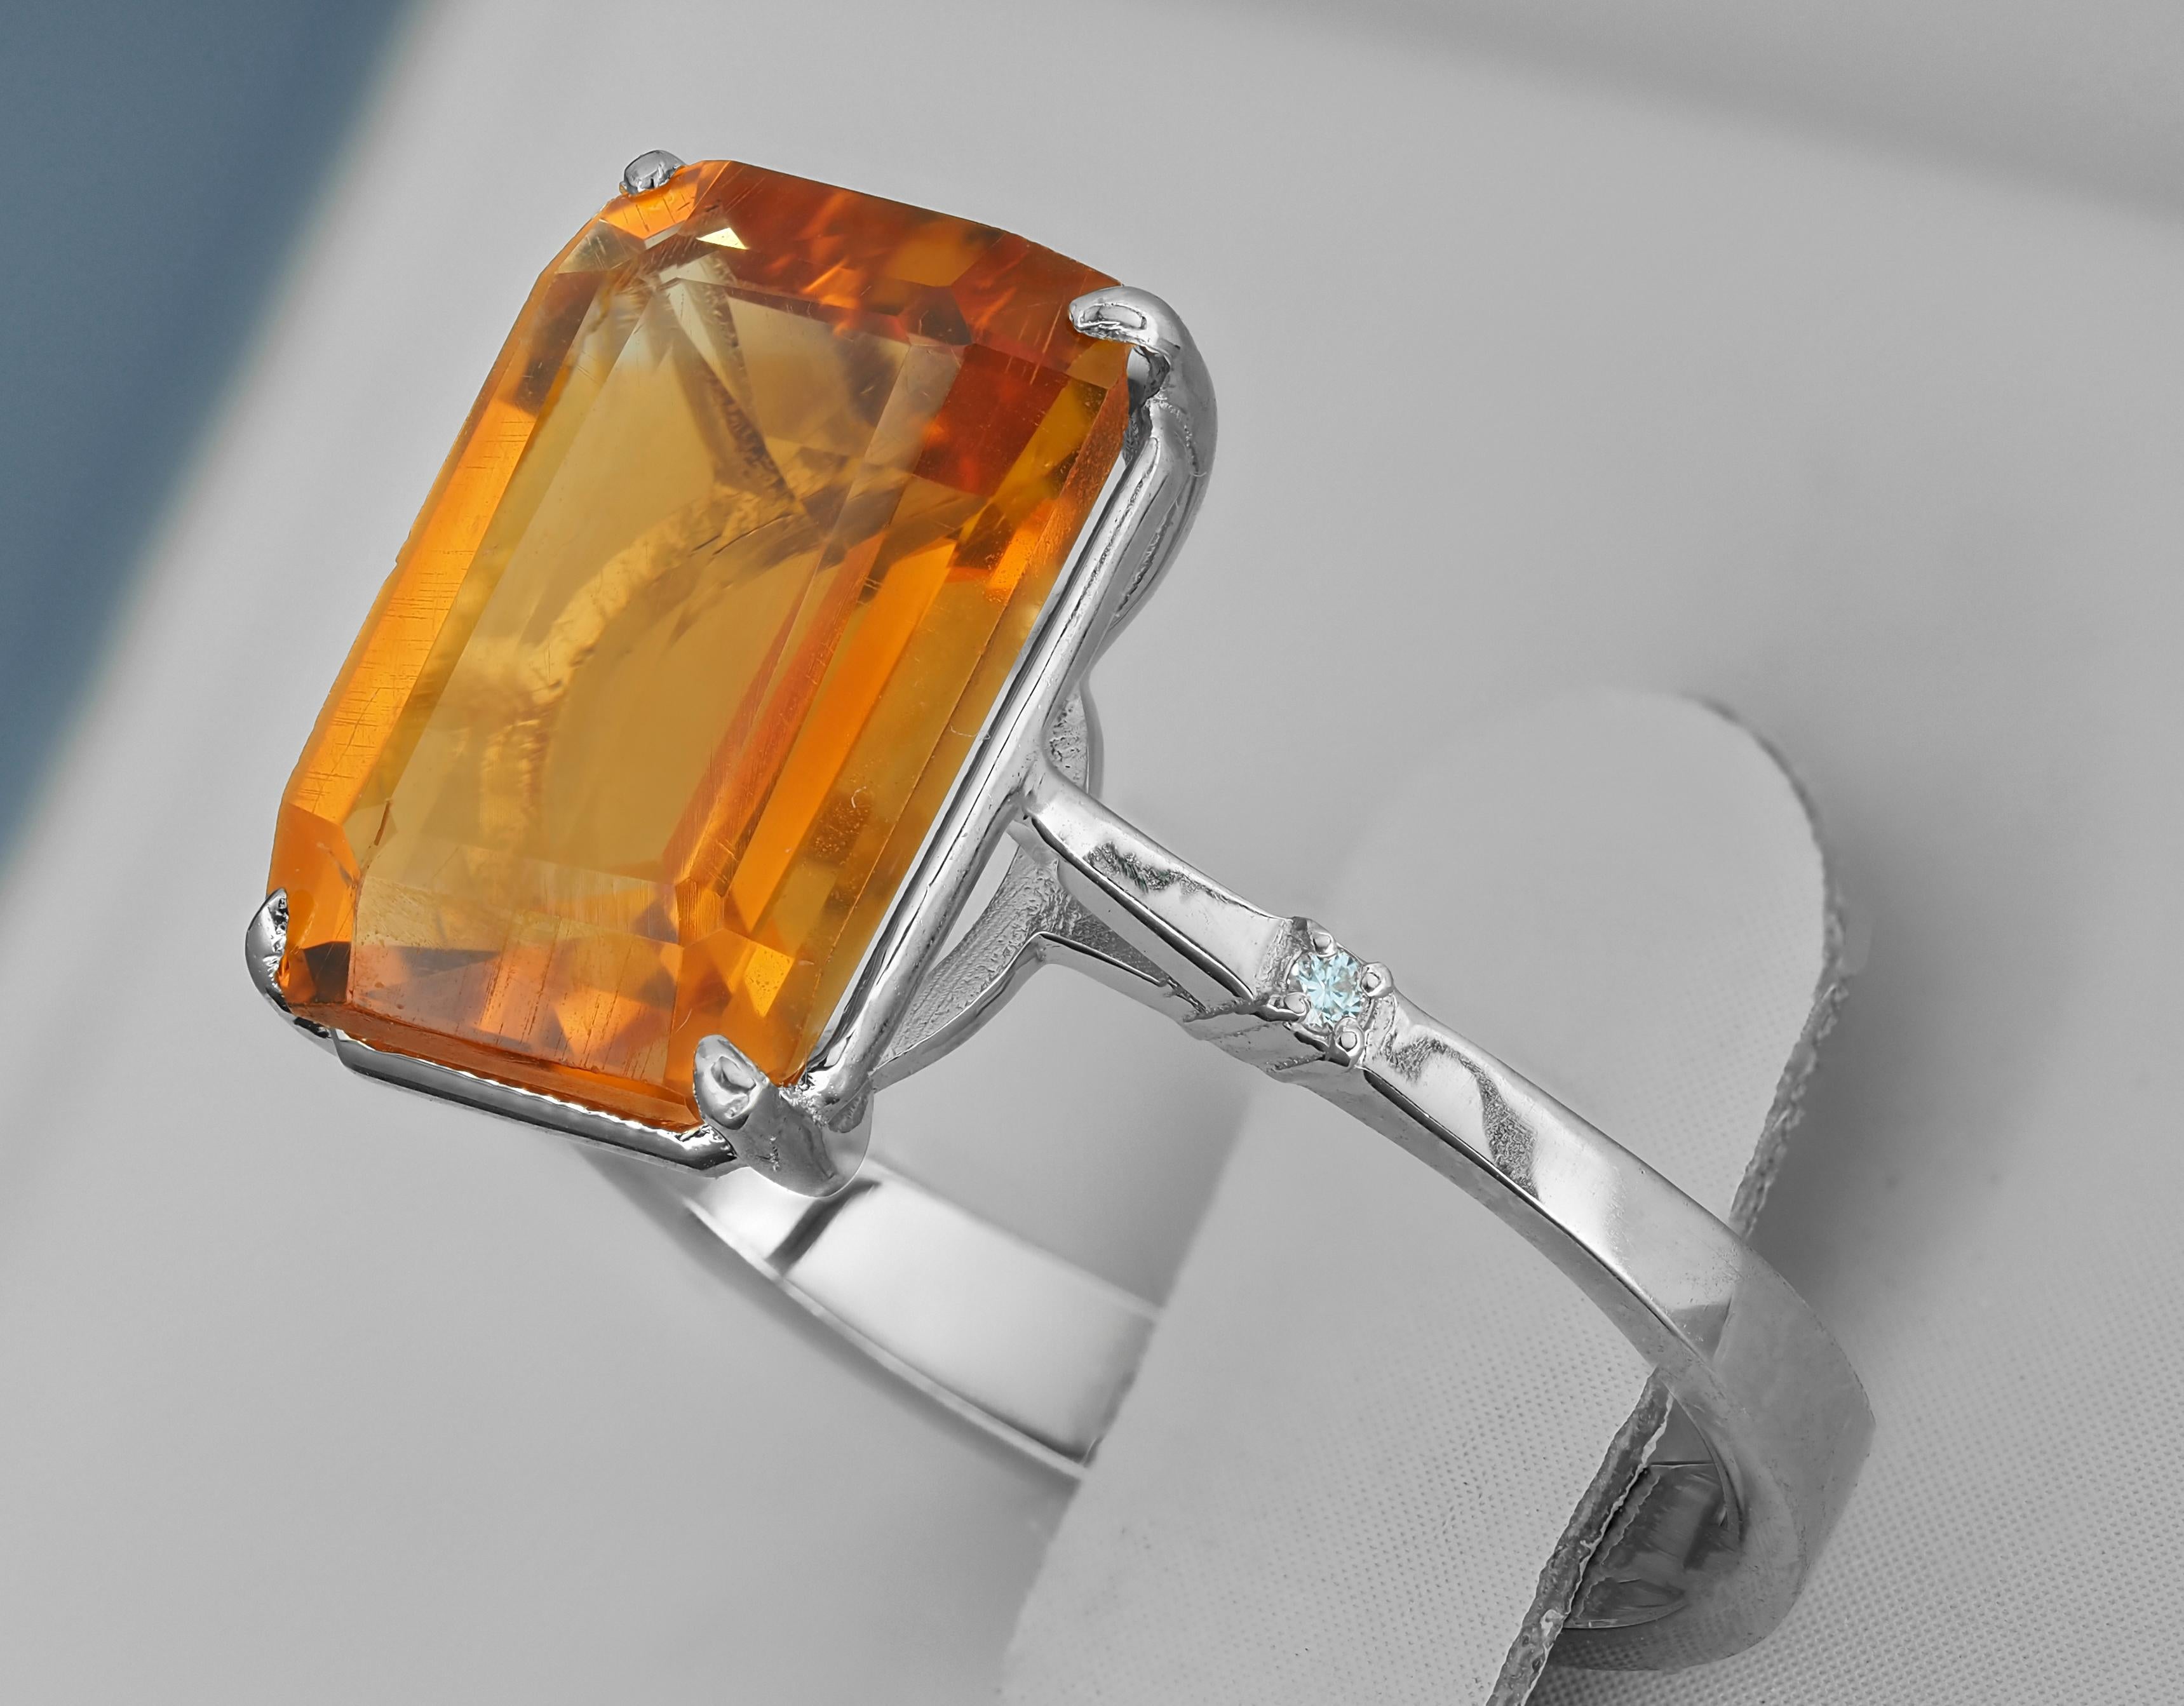 Ring with natural citrine and diamonds.
Natural citrine ring. Yellow citrine ring. 

Metal - Sterling Silver
Weight - 3 gr depends from size
Set with citrine, color - yellow
Emerald cut, aprox 3 ct. in total (11.5x8.5mm)
Clarity: Transparent with